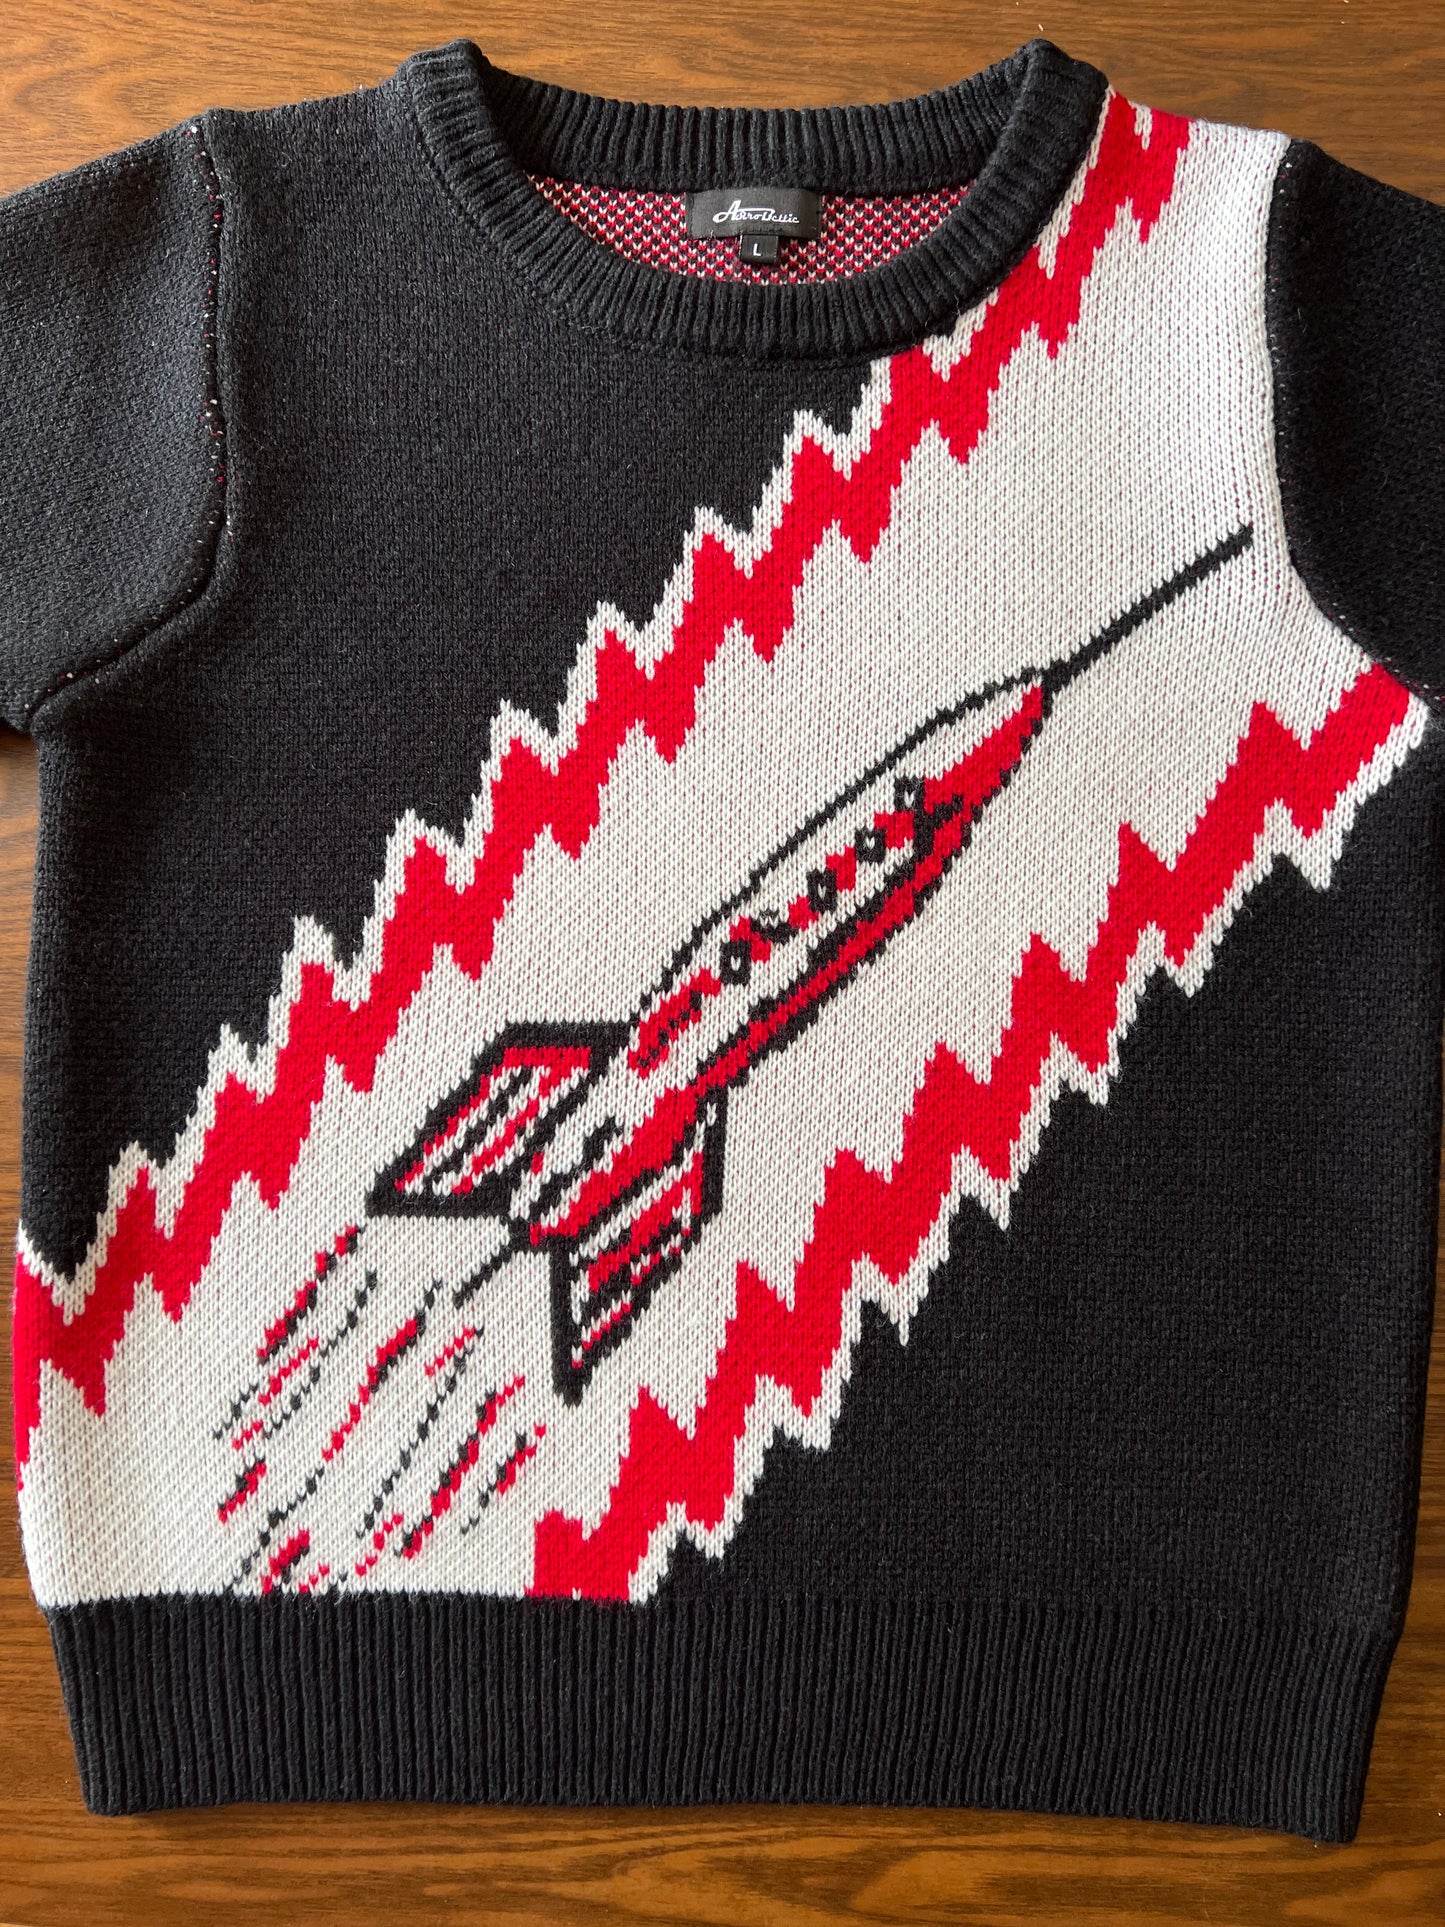 To the Moon Rocket Sweater - Black